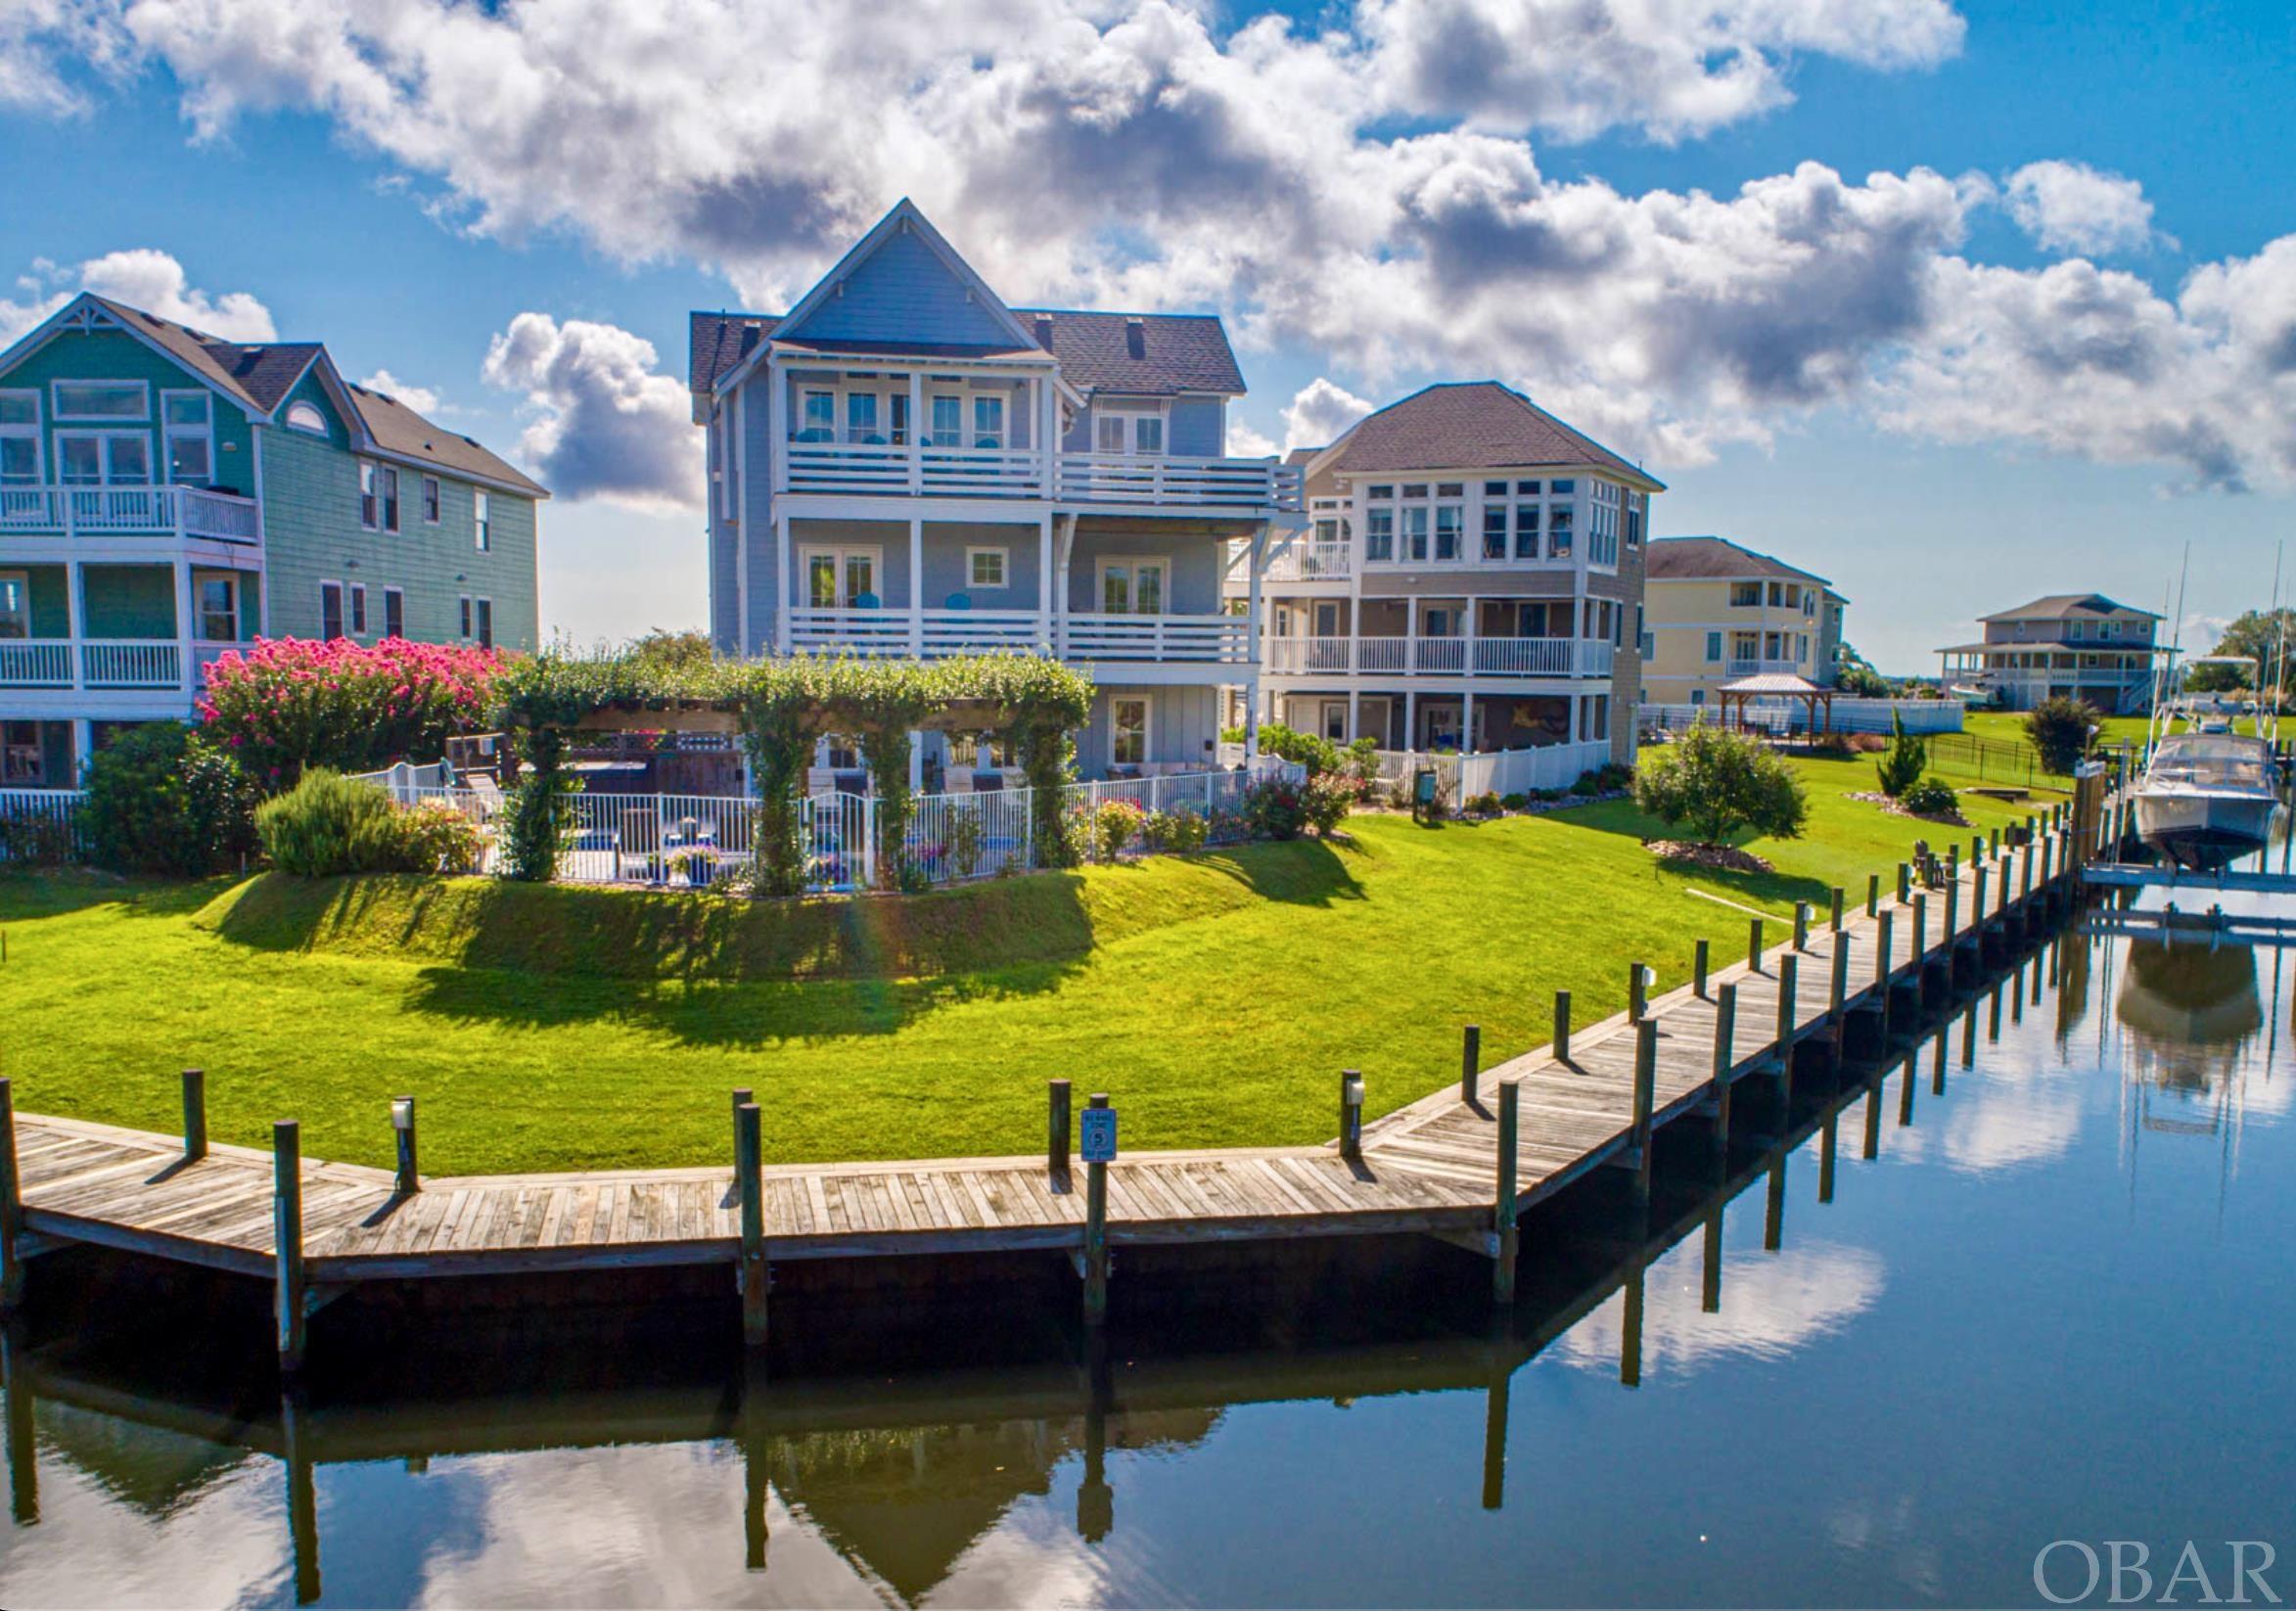 Experience coastal luxury at its best with this stunning 5-bedroom, 4-bath waterfront haven in the esteemed boating enclave of The Peninsula, Outer Banks, NC. Set on a high lot with 140 feet of deep-water canal, this coastal gem offers a seamless blend of indoor-outdoor living, boasting breathtaking views of Shallowbag Bay and the tranquil marshland. Crafted by renowned OBX builder Mike York, this home is a masterpiece of craftsmanship and tranquility. Upon entering the second-floor main entry, you're greeted by Eddie Bauer engineered hardwood floors, intricate custom carpentry, and a tray-paneled accent ceiling crowned by transom windows. The open-concept design harmoniously marries elegance and functionality, offering an inviting living experience. Ascend to the top level via elevator or stairs to discover a captivating realm of custom details, characterized by soothing sea-toned palettes. The expansive great room features a gas fireplace with a bespoke mantle, vaulted ceilings adorned with handcrafted wood beams, and transom windows that frame the panoramic views. The gourmet kitchen is a chef's dream, boasting leathered granite countertops, 48” KitchenAid gas cooktop, double electric oven, and handcrafted light fixtures crafted from California wine barrel rings. The mid level is home to three bedrooms, two of which offer private access to a spa-like Jack & Jill bathroom with Caribbean marble countertops and vessel sinks. The main primary suite boasts a luxurious bathroom with a double vanity and a custom tile shower with dual rain shower heads. This level also hosts a utility room with washer/dryer and ample storage. On the ground level, find another king-sized bedroom, a full bath with Caribbean marble countertop, and a tastefully designed entertainment space featuring inlaid tray ceilings, pool table, multiple large-screen TVs, and a wet bar. The outdoor space is an oasis of relaxation, showcasing a saltwater pool, 7-person hot tub, and a spacious gathering area under a charming trellis adorned with fragrant Jasmine. Additional amenities include a one-car garage with laundry facilities and storage, Hardiplank siding, and a room for pool equipment. The Peninsula community offers hassle-free yard maintenance, a community boat ramp, and an ideal blend of second-home and primary residences. Don't miss this opportunity to embrace waterfront living in its finest form. Your coastal dream home awaits.